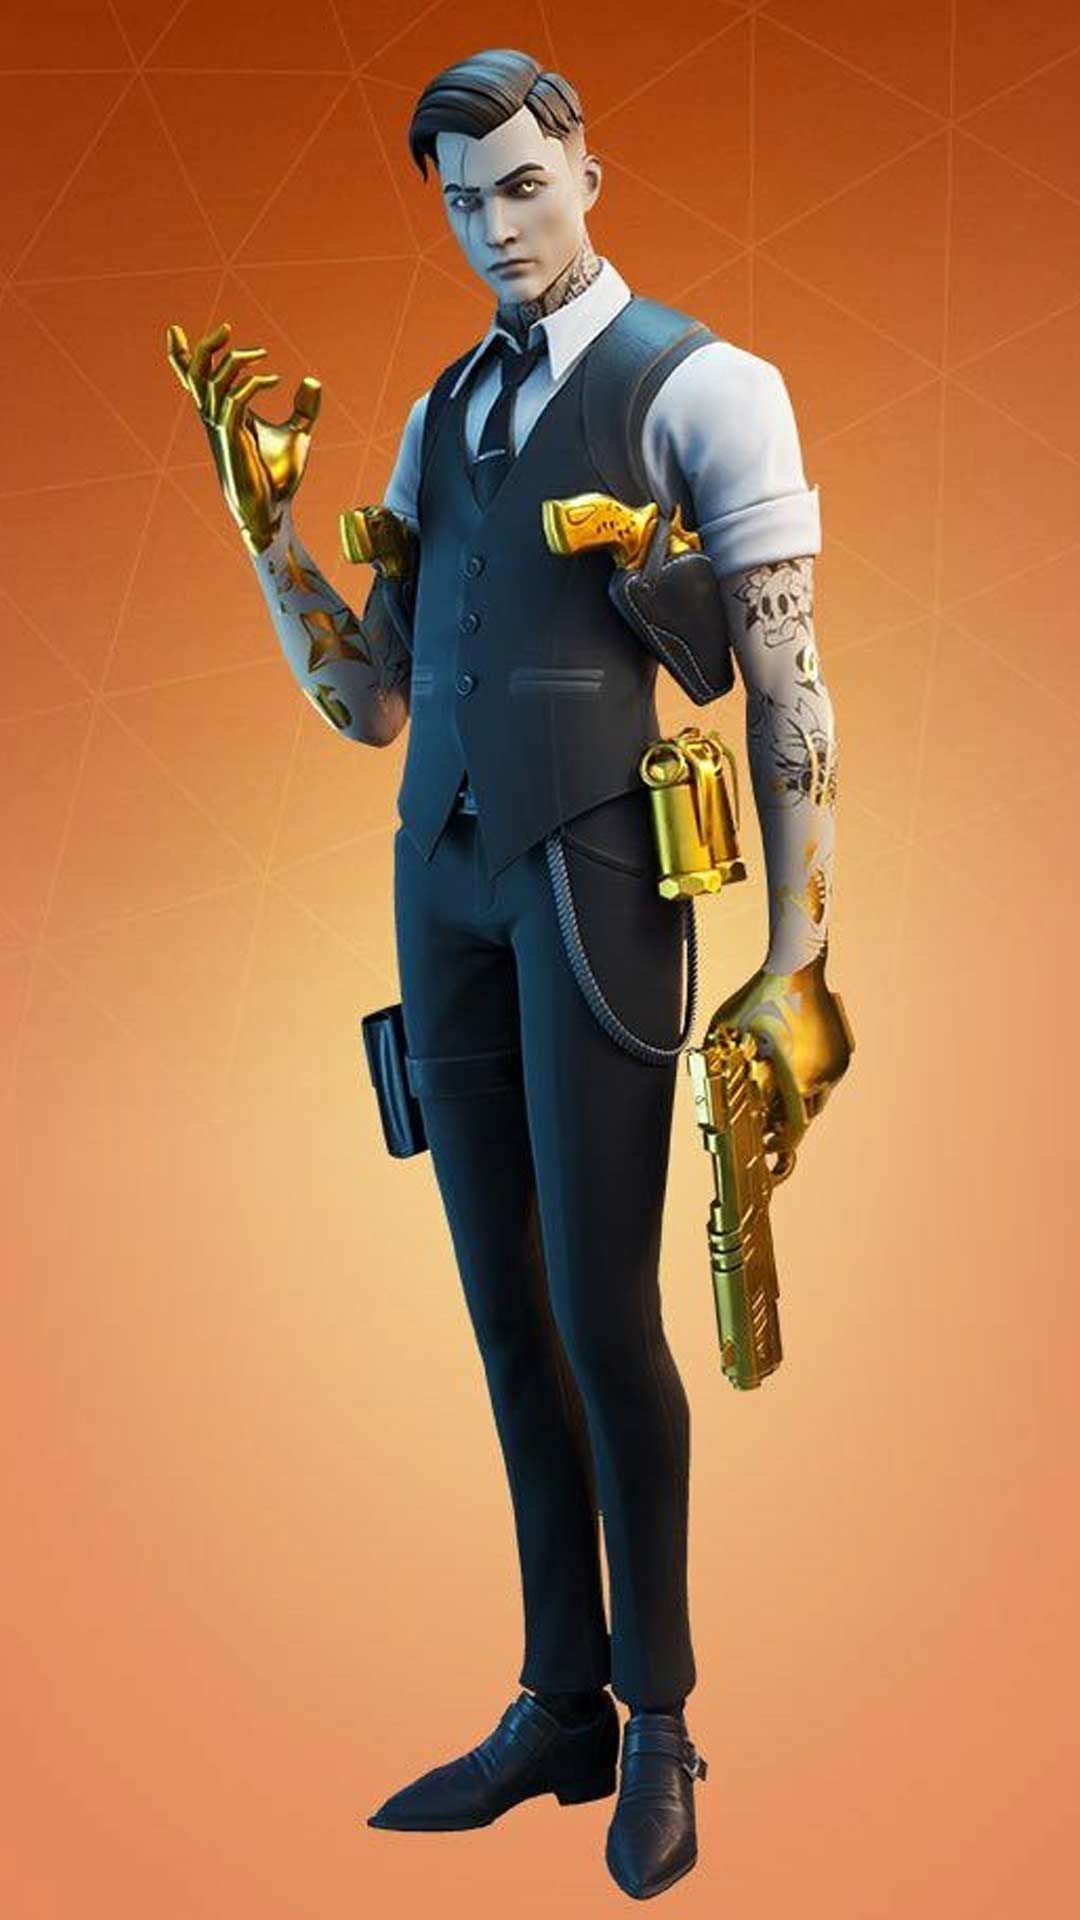 Fortnite The Device Event Midas Wallpaper 71316 1920x1080px